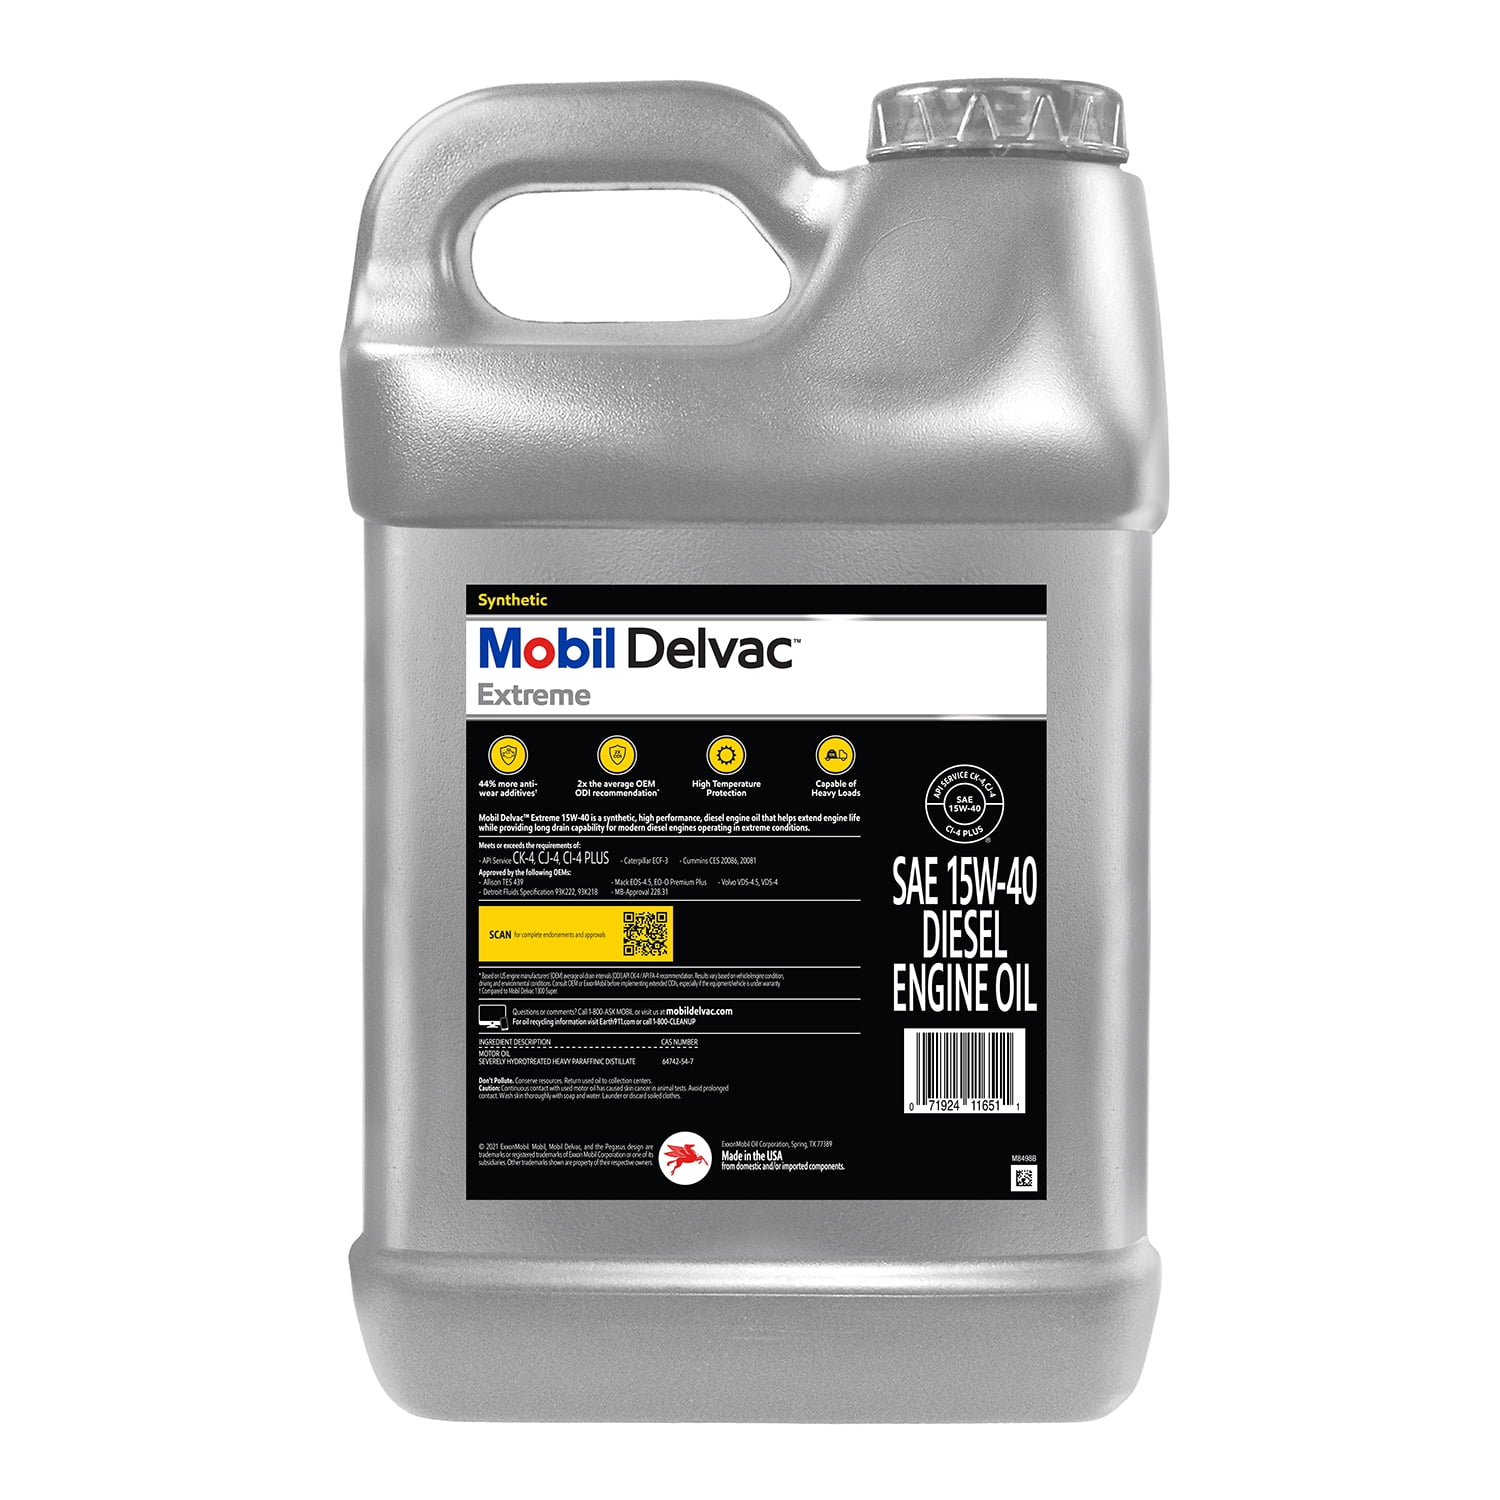 Mobil Delvac Extreme Heavy Duty Full Synthetic Diesel Engine Oil 15W-40, 2.5 gal - 1